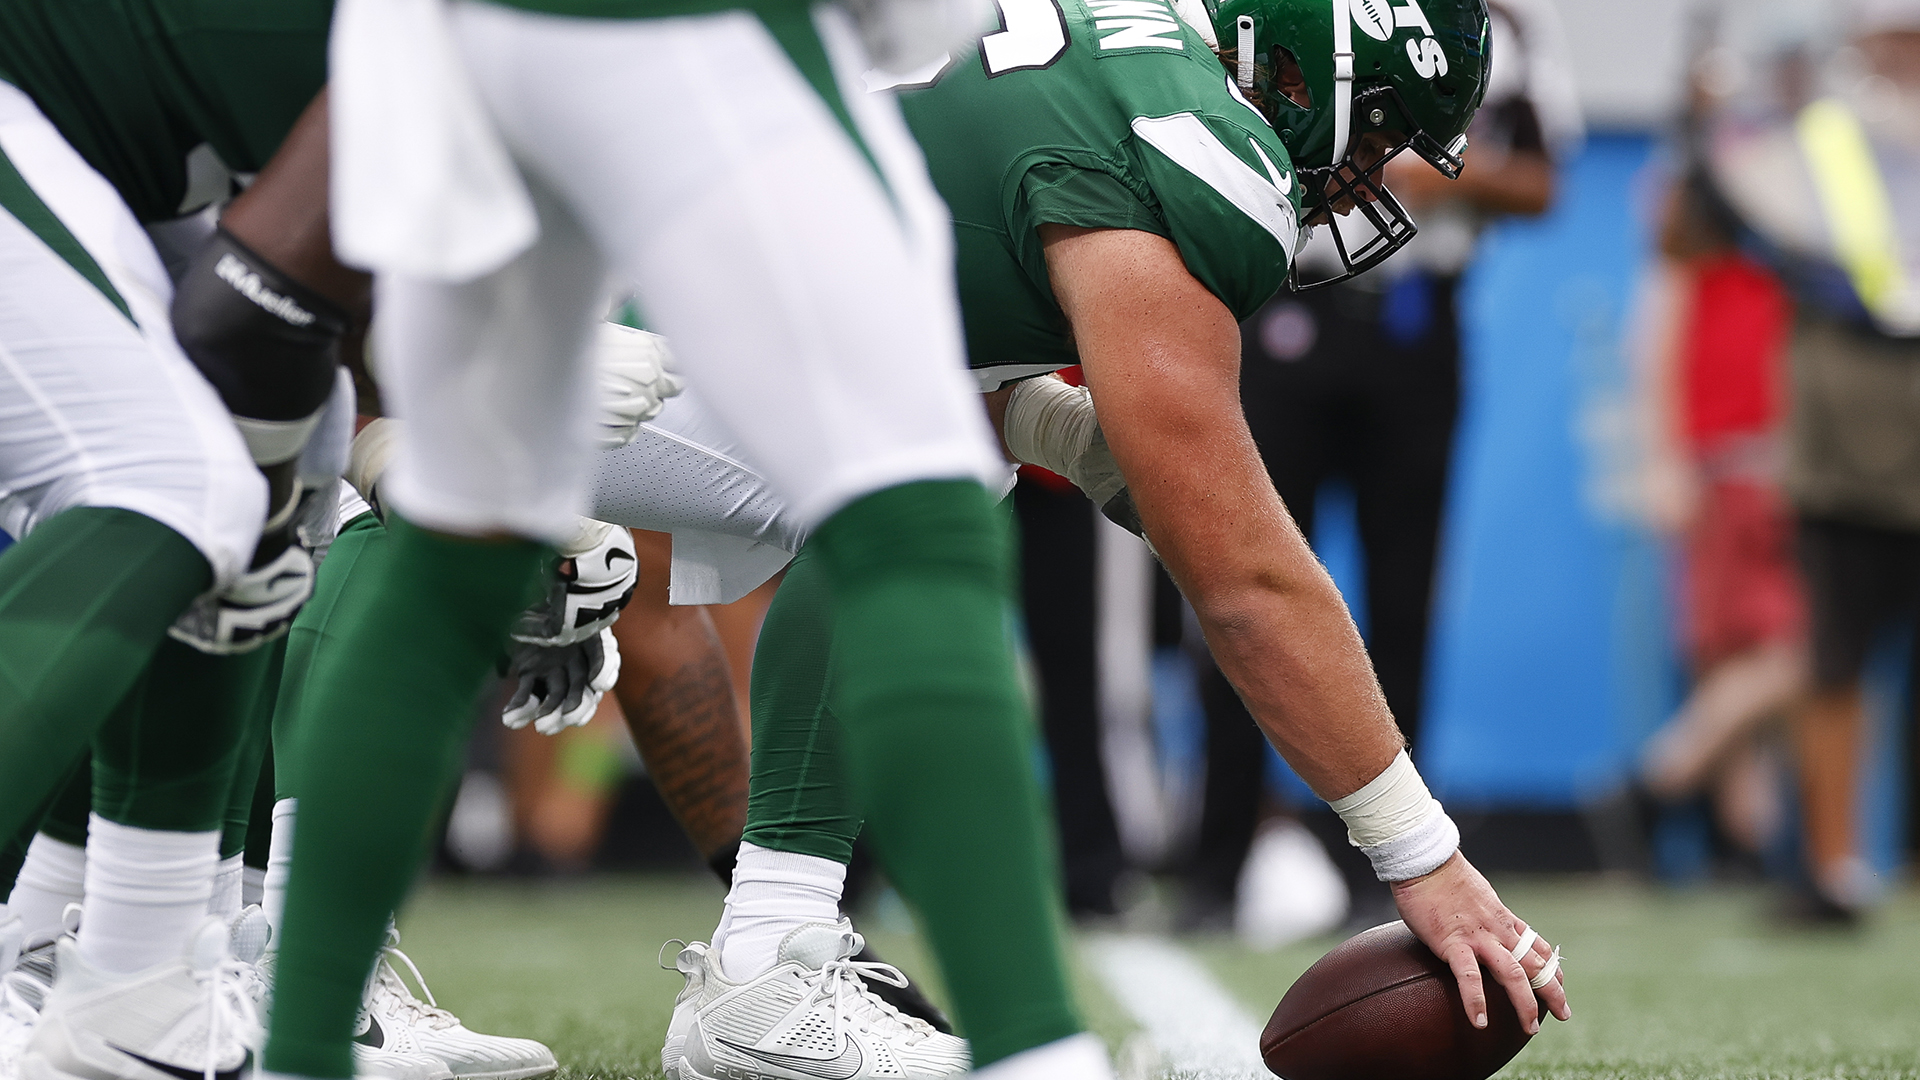 Watch New York Jets Football Games Outside USA on Paramount Plus